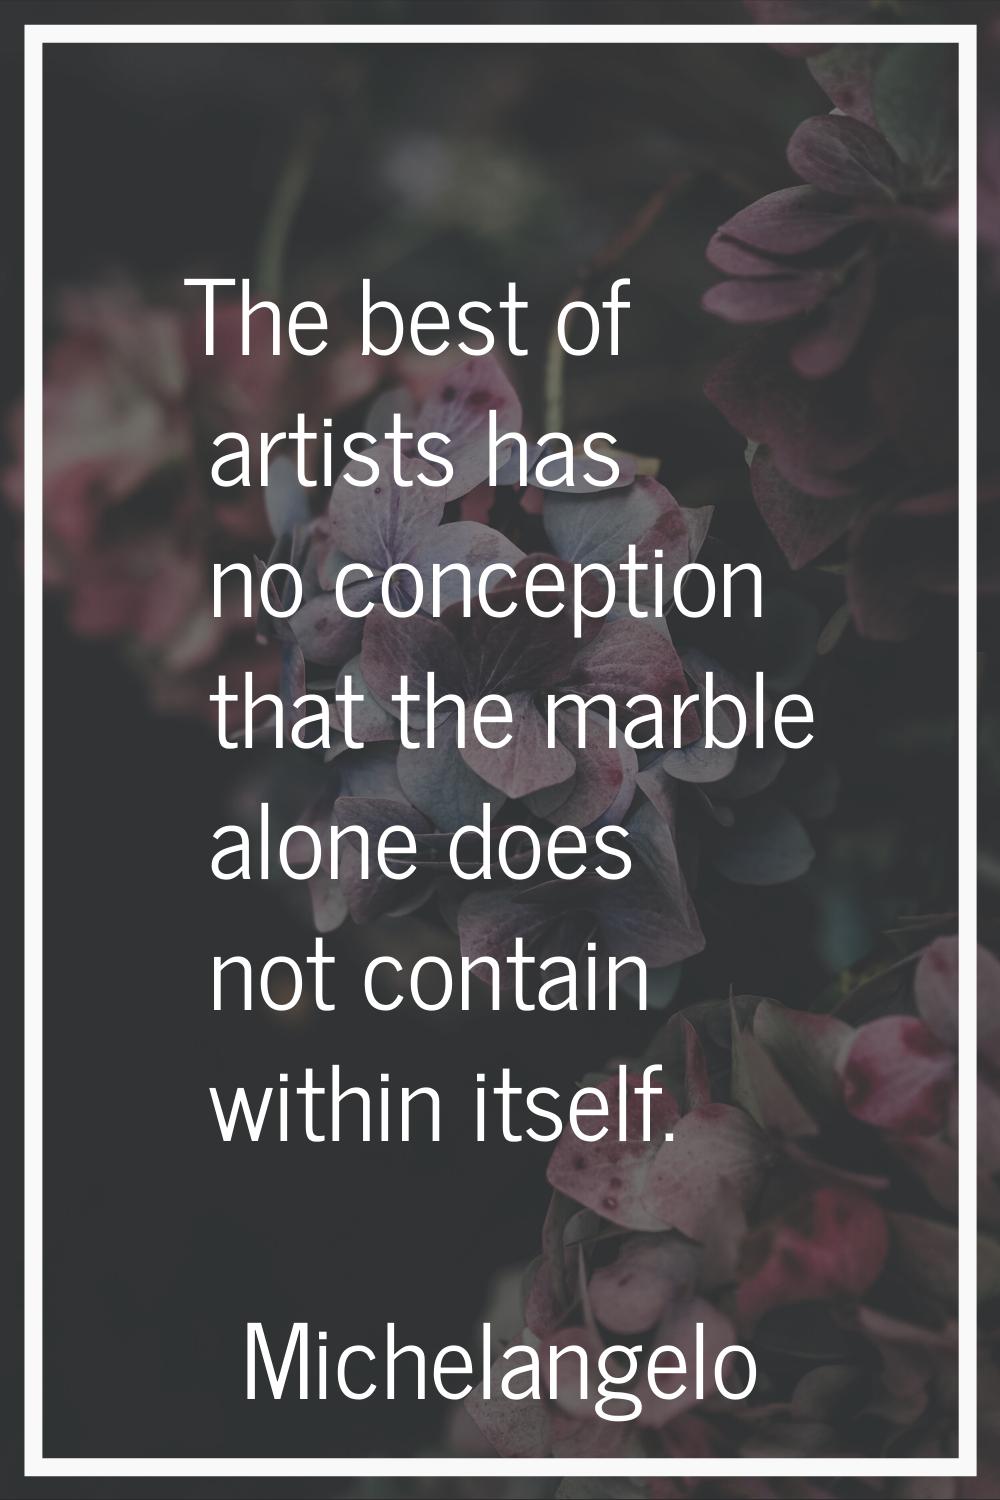 The best of artists has no conception that the marble alone does not contain within itself.